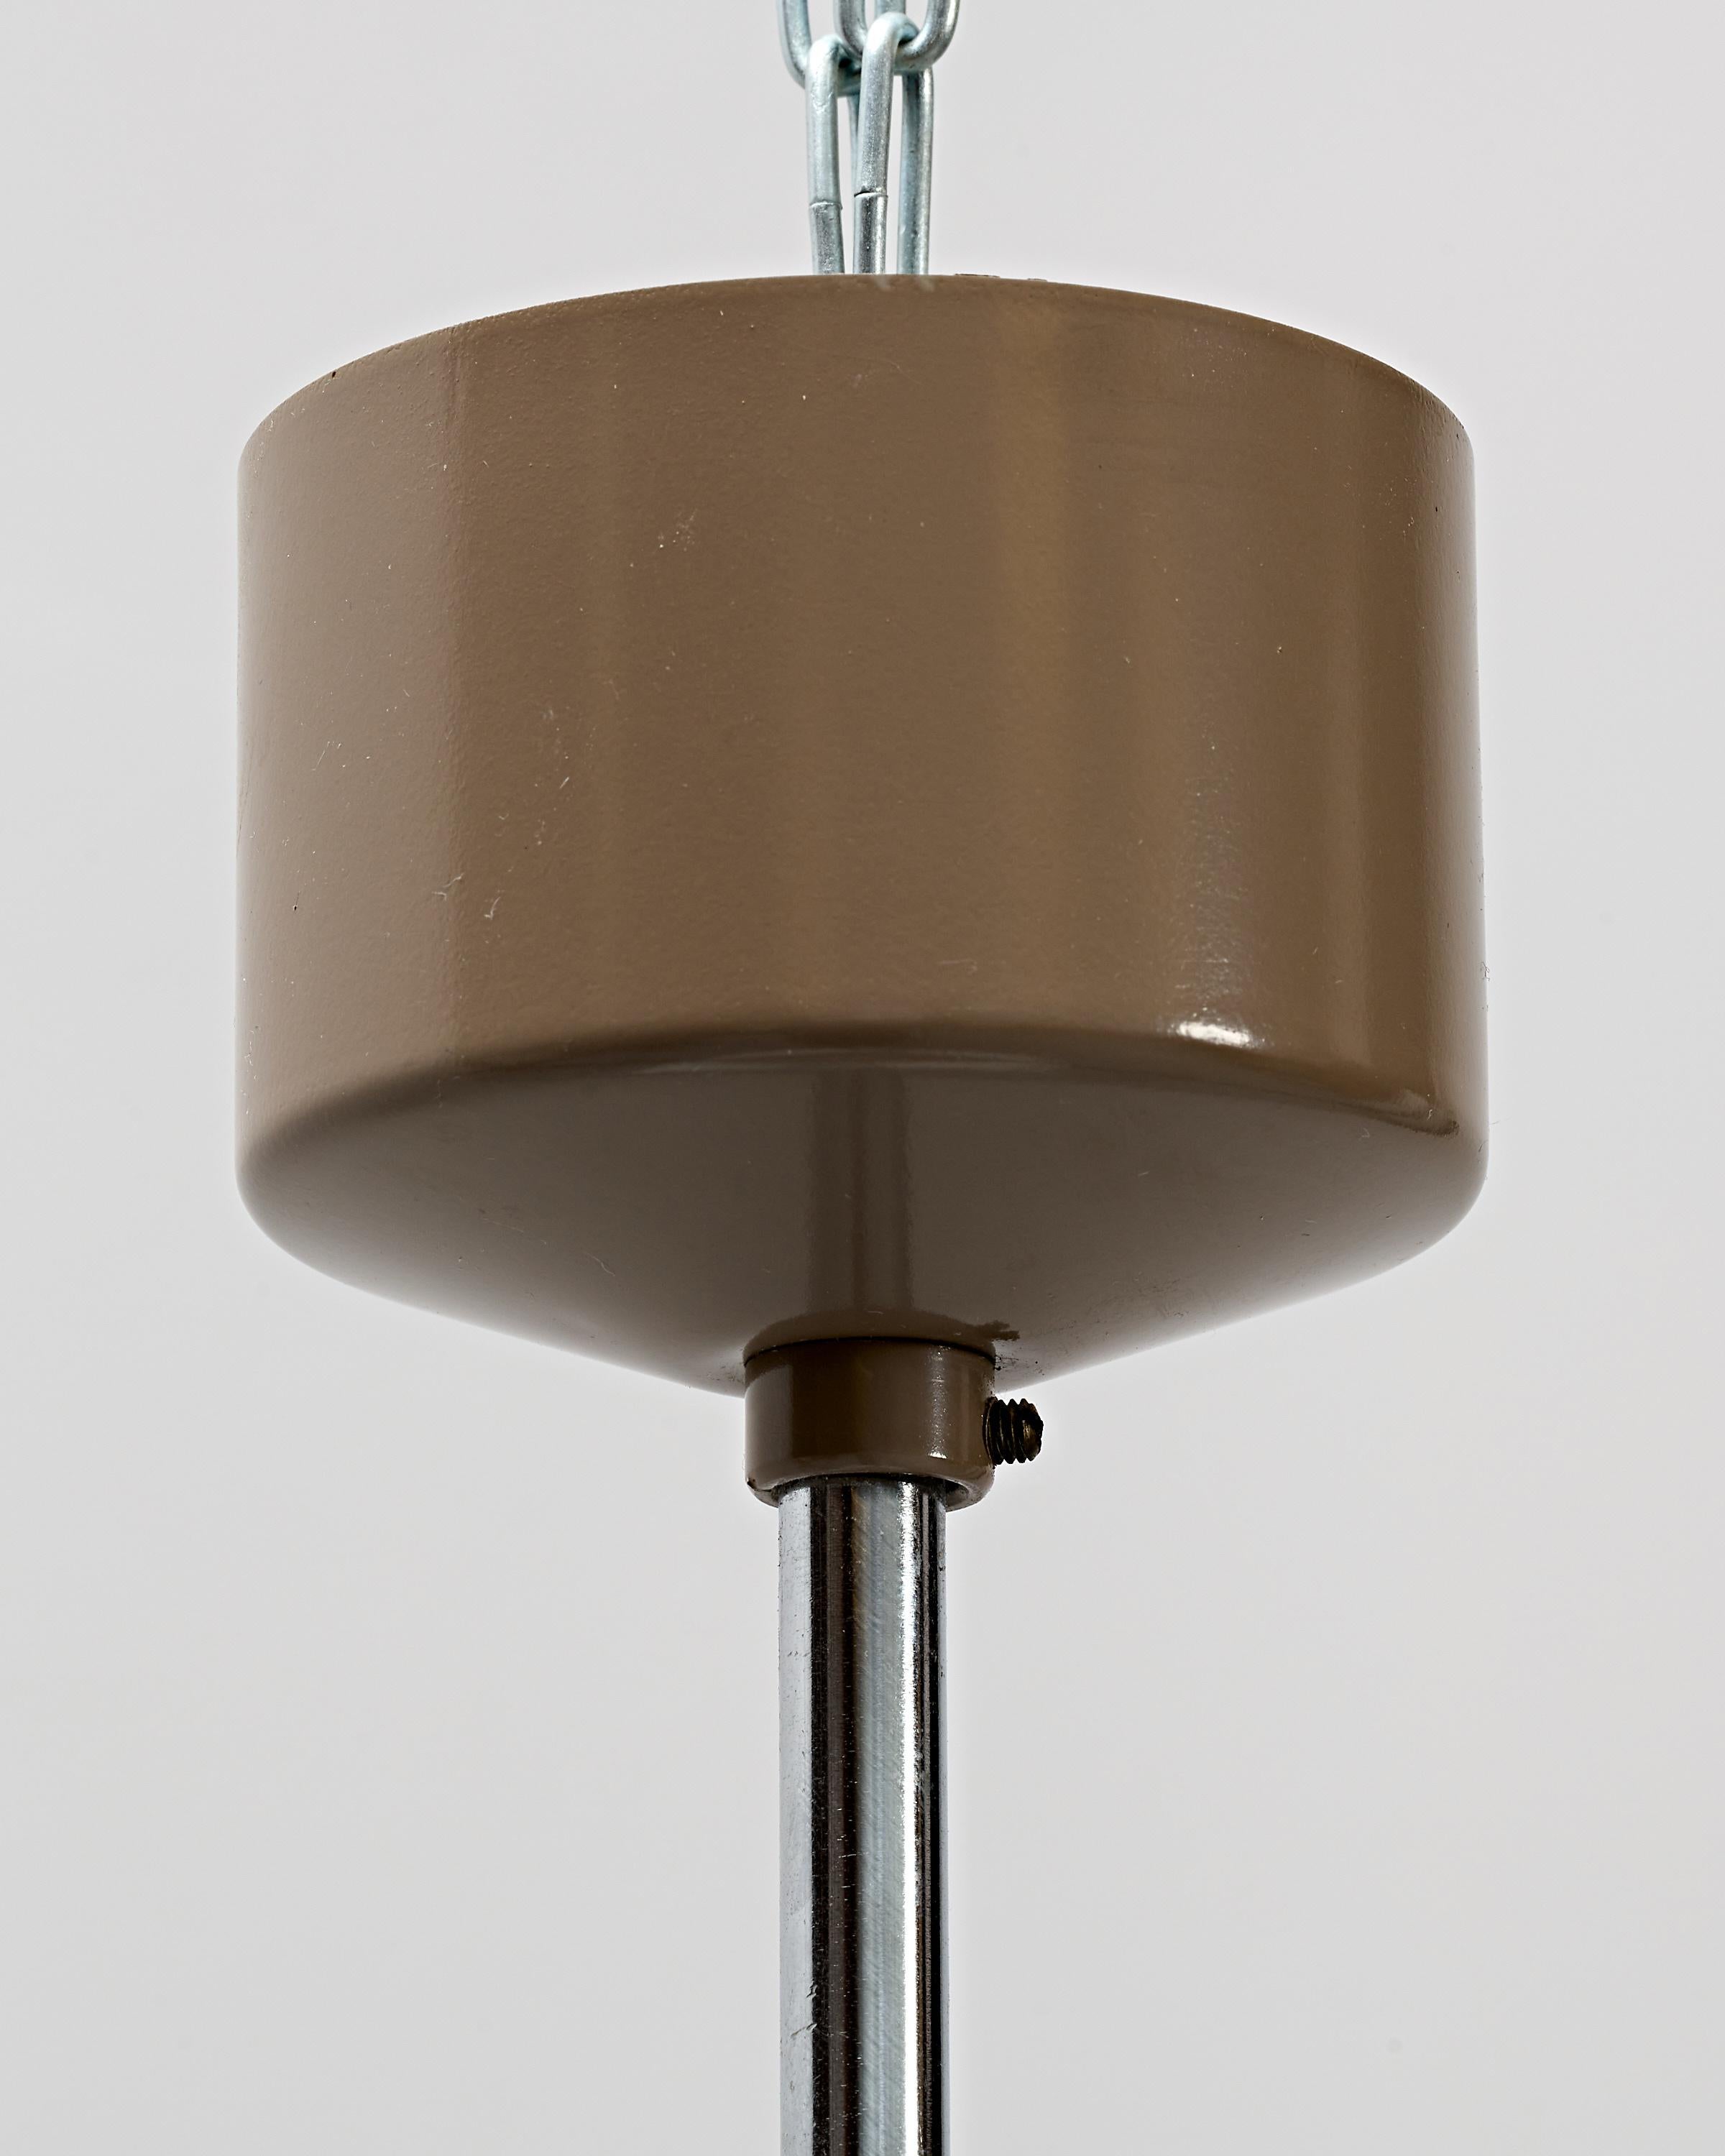 Czech Model 81501 Ceiling Lamp by Josef Hurka for Napako, 1960s For Sale